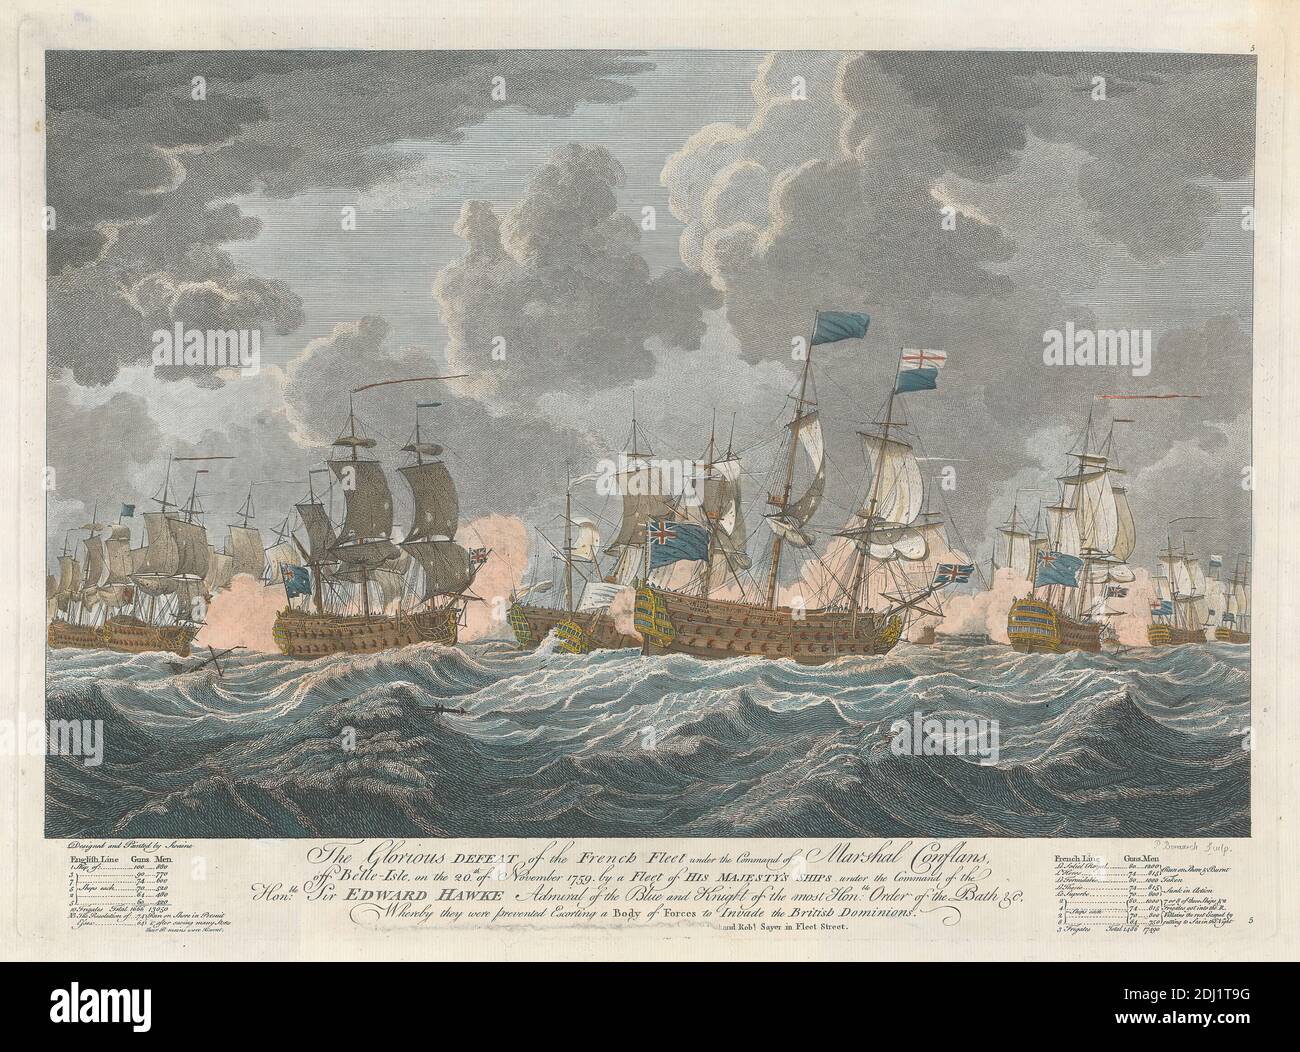 The Glorious Defeat of the French Fleet under the Command of Marshal Conflans, off Belle-Isle, on the 20th of November, 1759, ..., Print made by Peter P. Benazech, 1767–1794, after Francis Swaine, 1730–1782, British, Published by Robert Sayer, 1725–1794, British, Published by Henry Parker, 1725–1809, British, ca. 1759, Line engraving and etching, hand colored on moderately thick, slightly textured, cream laid paper, Sheet: 14 3/16 x 20 11/16 inches (36 x 52.5 cm), Plate: 13 3/16 x 18 5/16 inches (33.5 x 46.5 cm), and Image: 11 7/16 x 17 1/2 inches (29 x 44.4 cm), battle, cannons, clouds Stock Photo